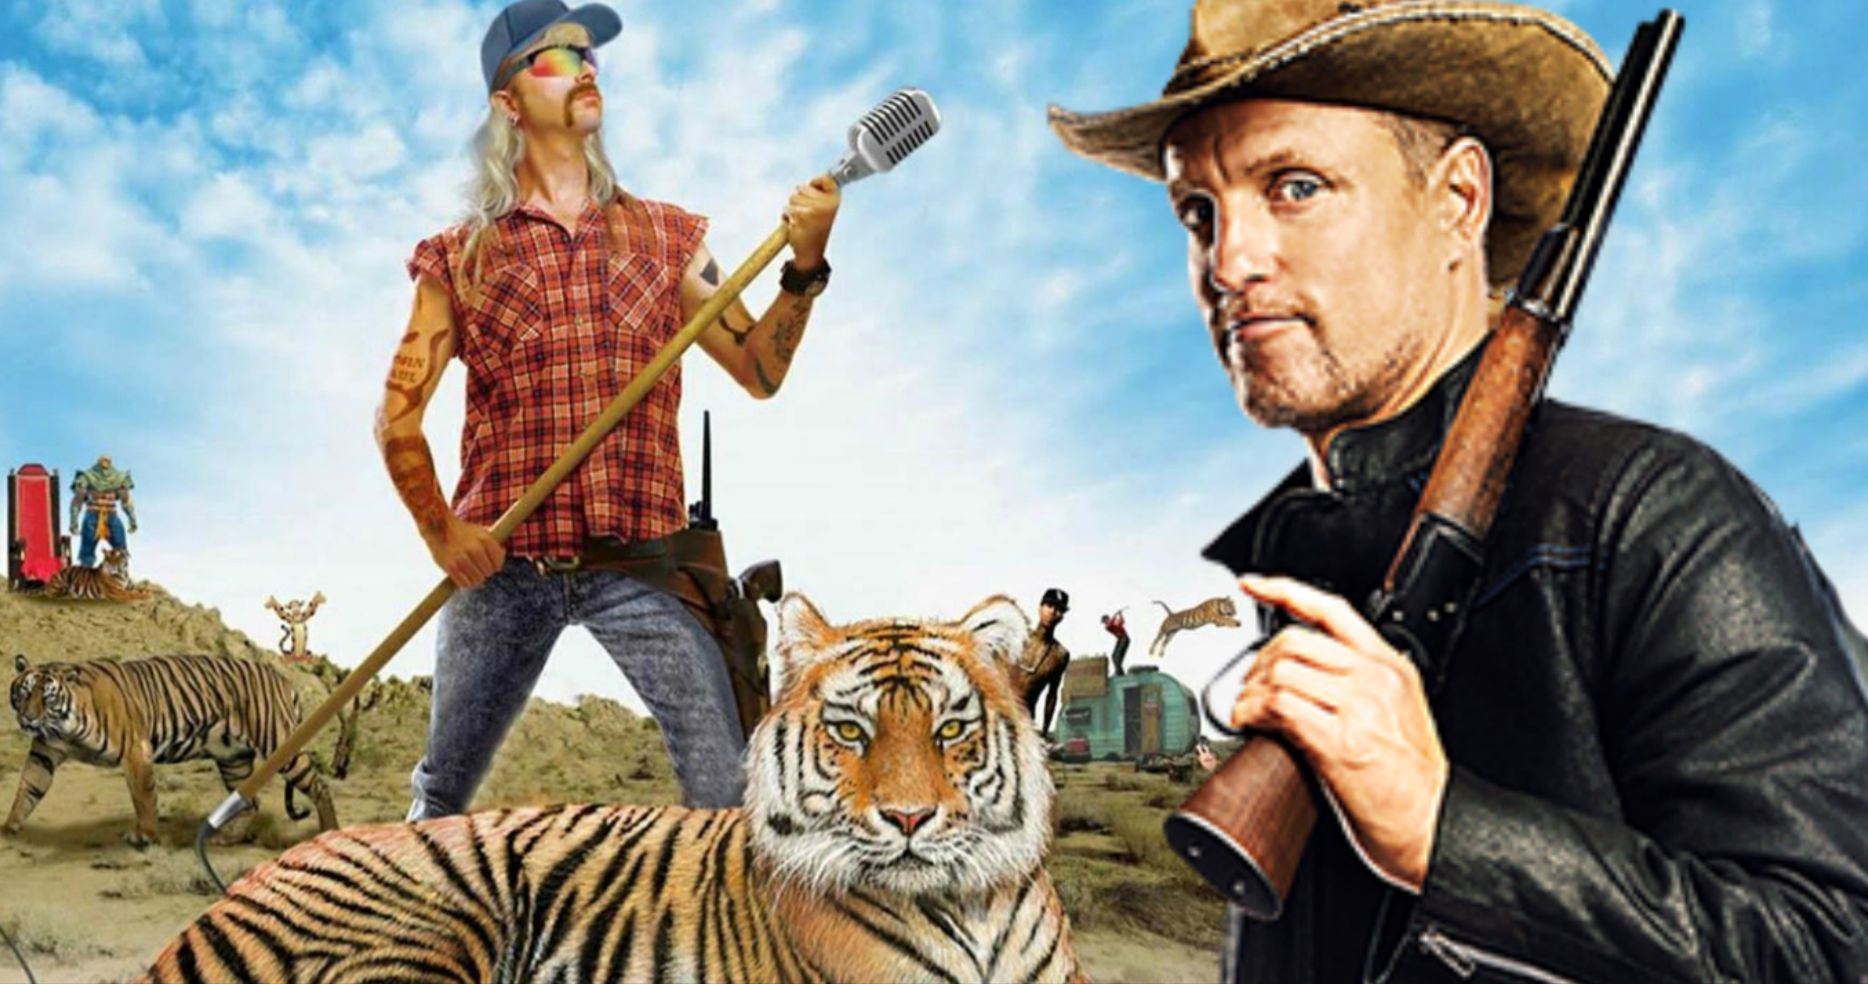 Tiger King Movie Cast: David Spade Thinks Woody Harrelson Would Be a Better Joe Exotic